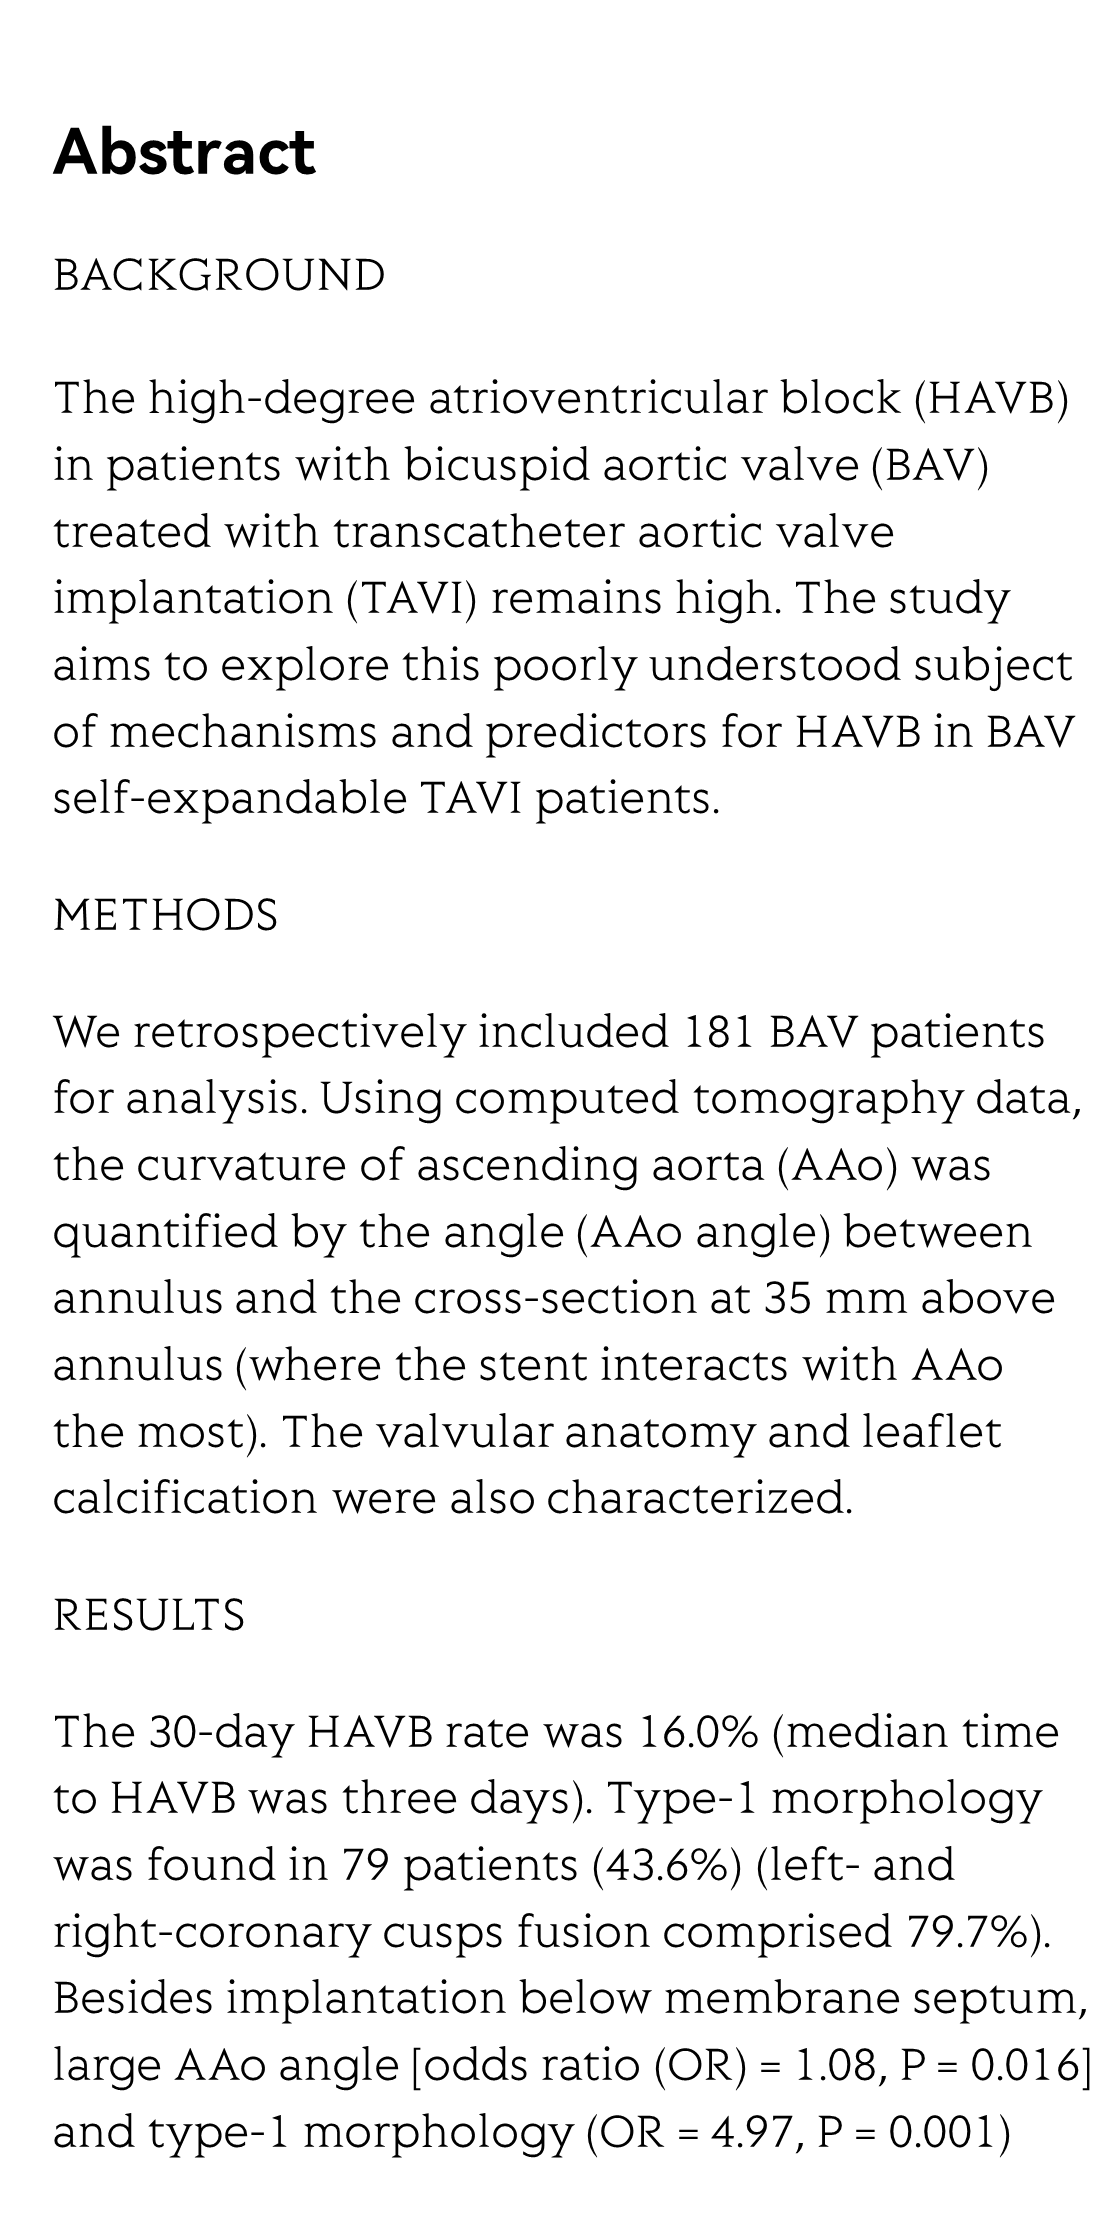 The incidence and predictors of high-degree atrioventricular block in patients with bicuspid aortic valve receiving self-expandable transcatheter aortic valve implantation_2